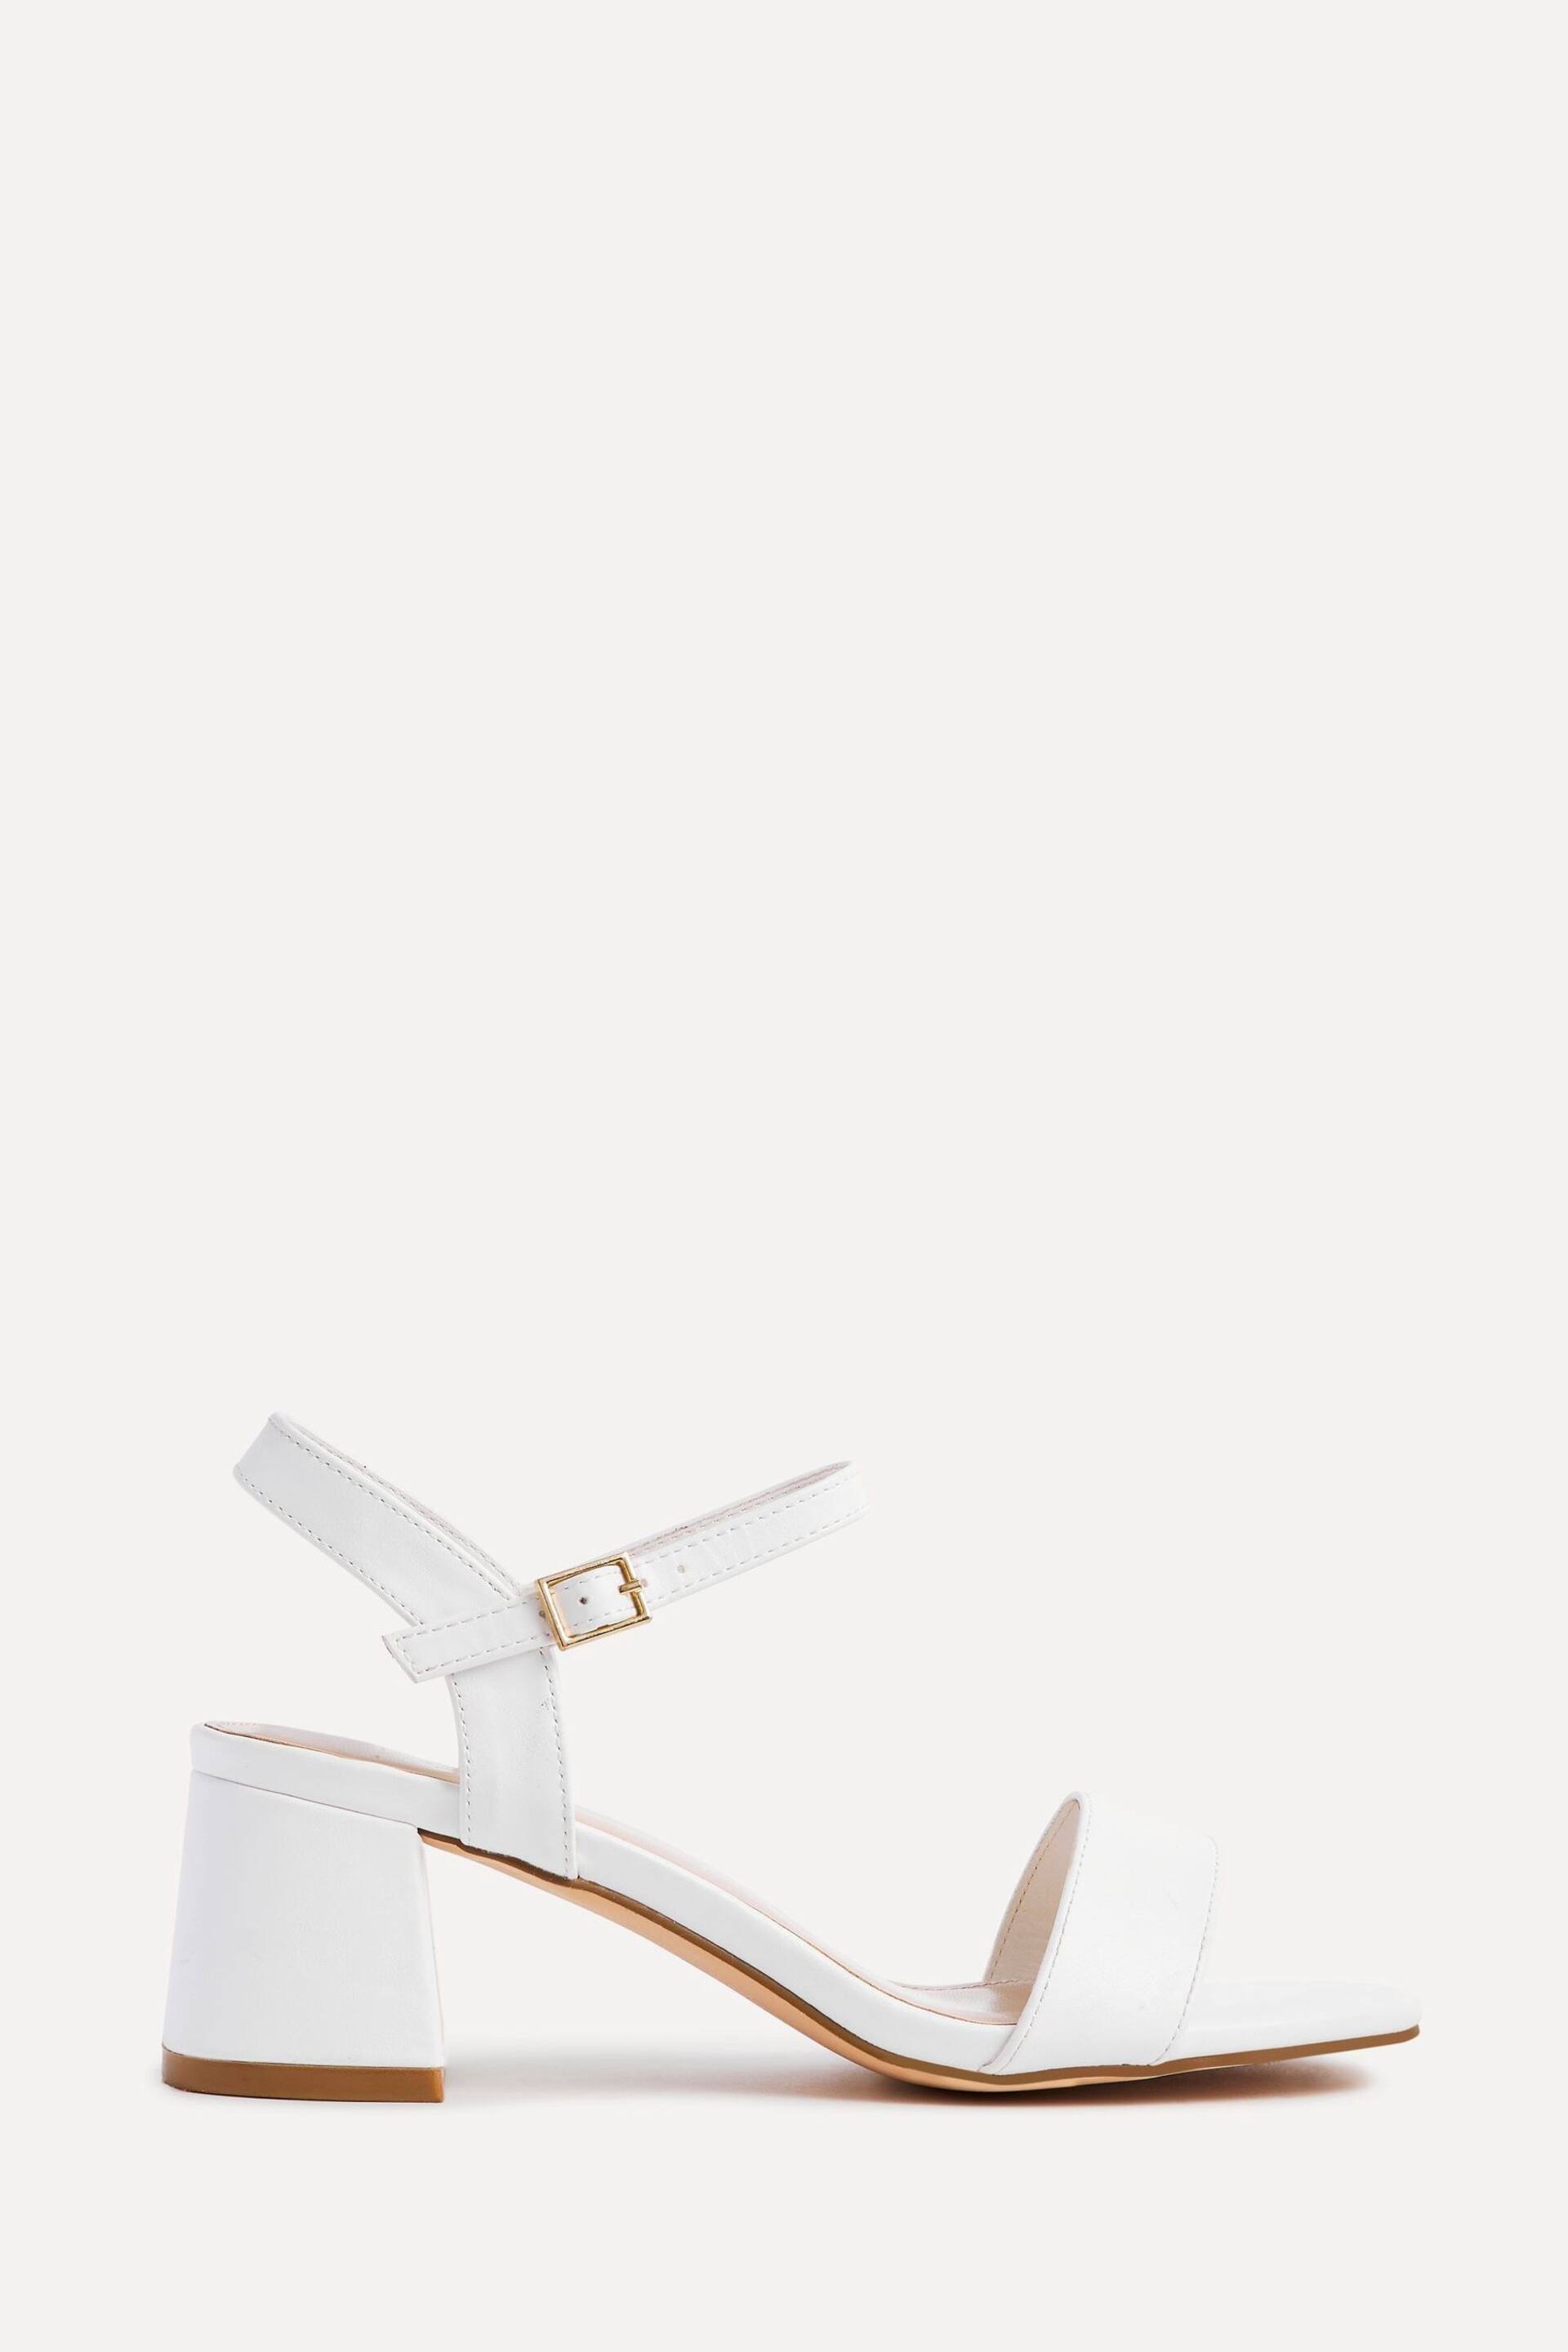 Linzi White Darcie Barely There Block Heeled Sandals - Image 2 of 4